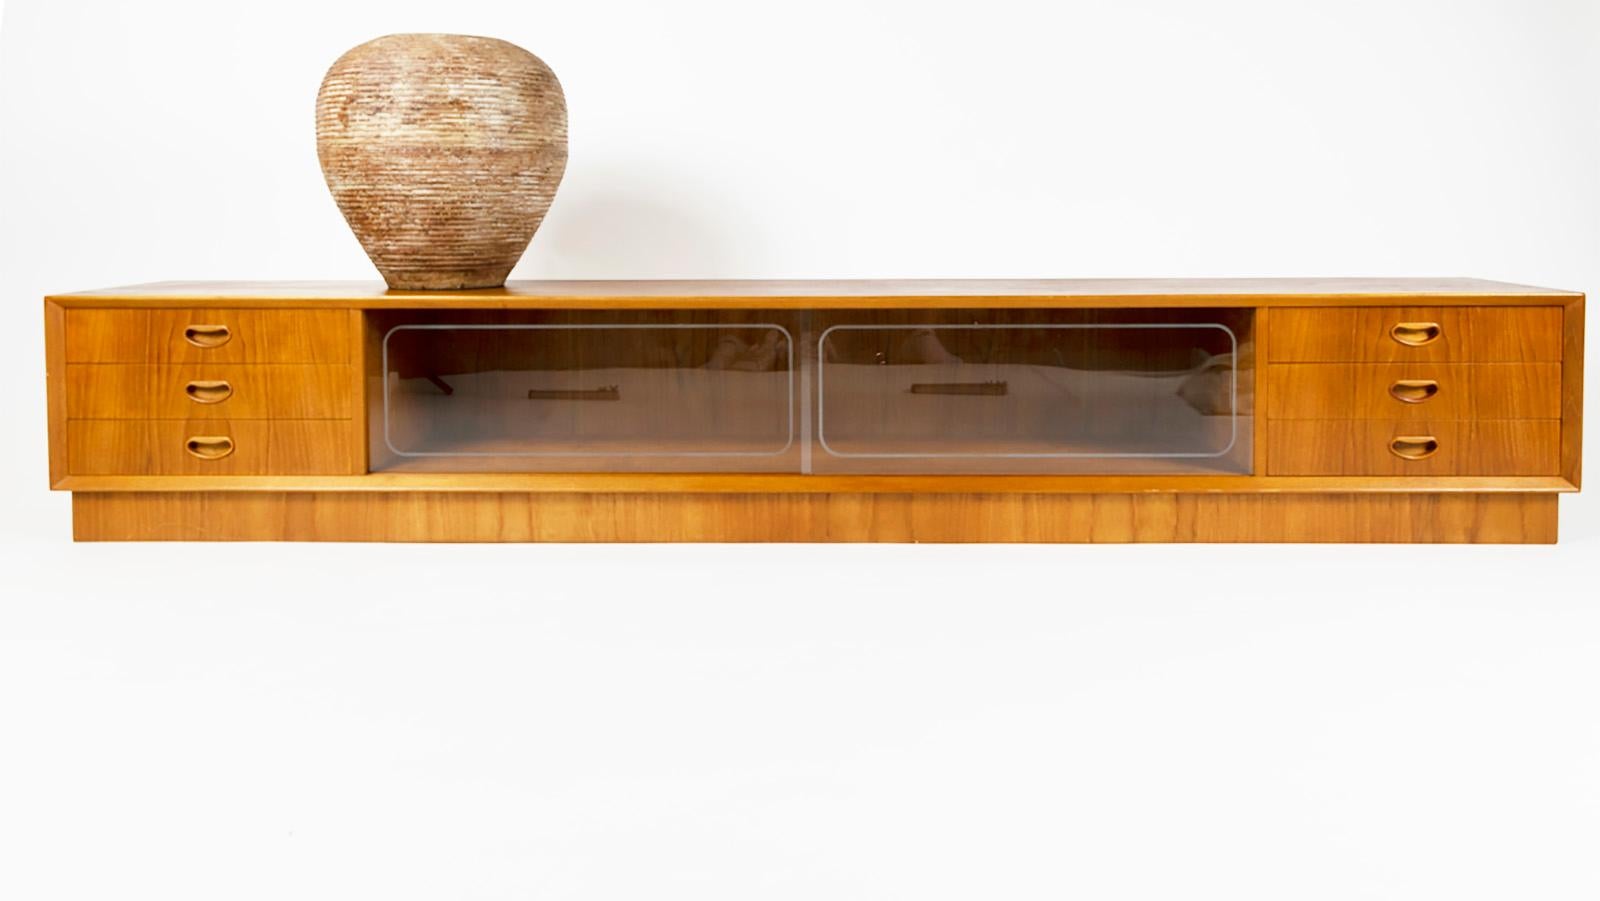 Rare extreme low teak sideboard. 225 cm long!! Stands with 3 drawers on each side, all drawers covered with green fabric. Drawer handles are made of solid teak in the Peter Hvidt style (smiling handles) mid section with 2 engraved glass sliding